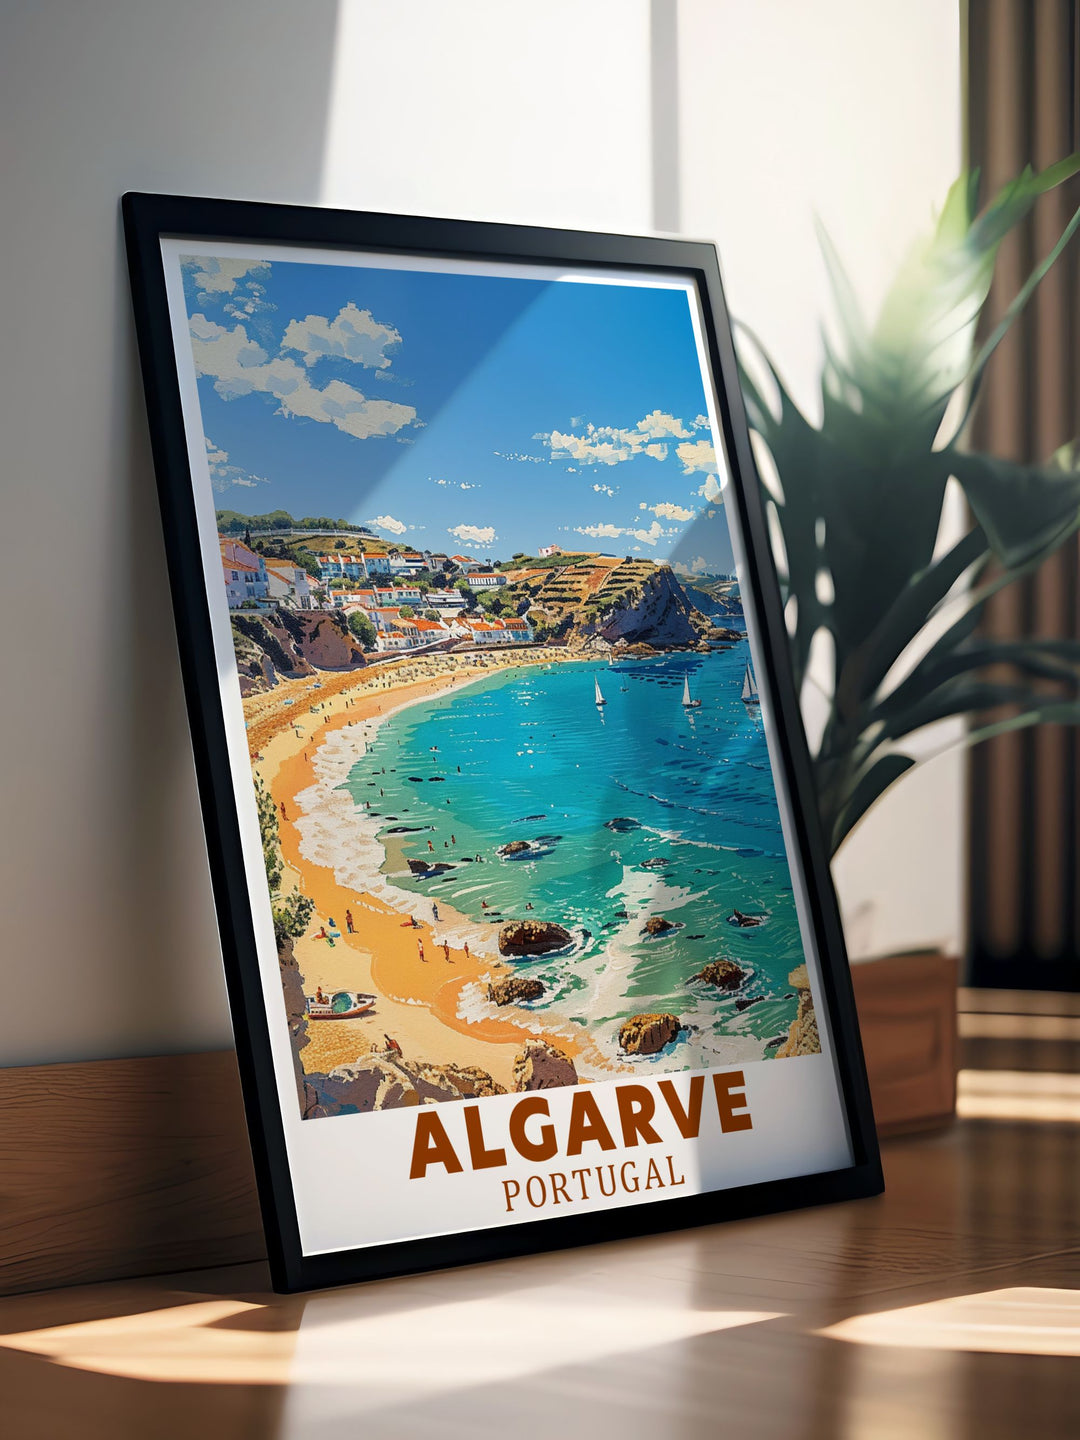 The natural beauty of Lagos and the Algarve coast is depicted in this travel poster, highlighting the dramatic cliffs and clear waters, perfect for enhancing your home with a piece of Portugals charm.